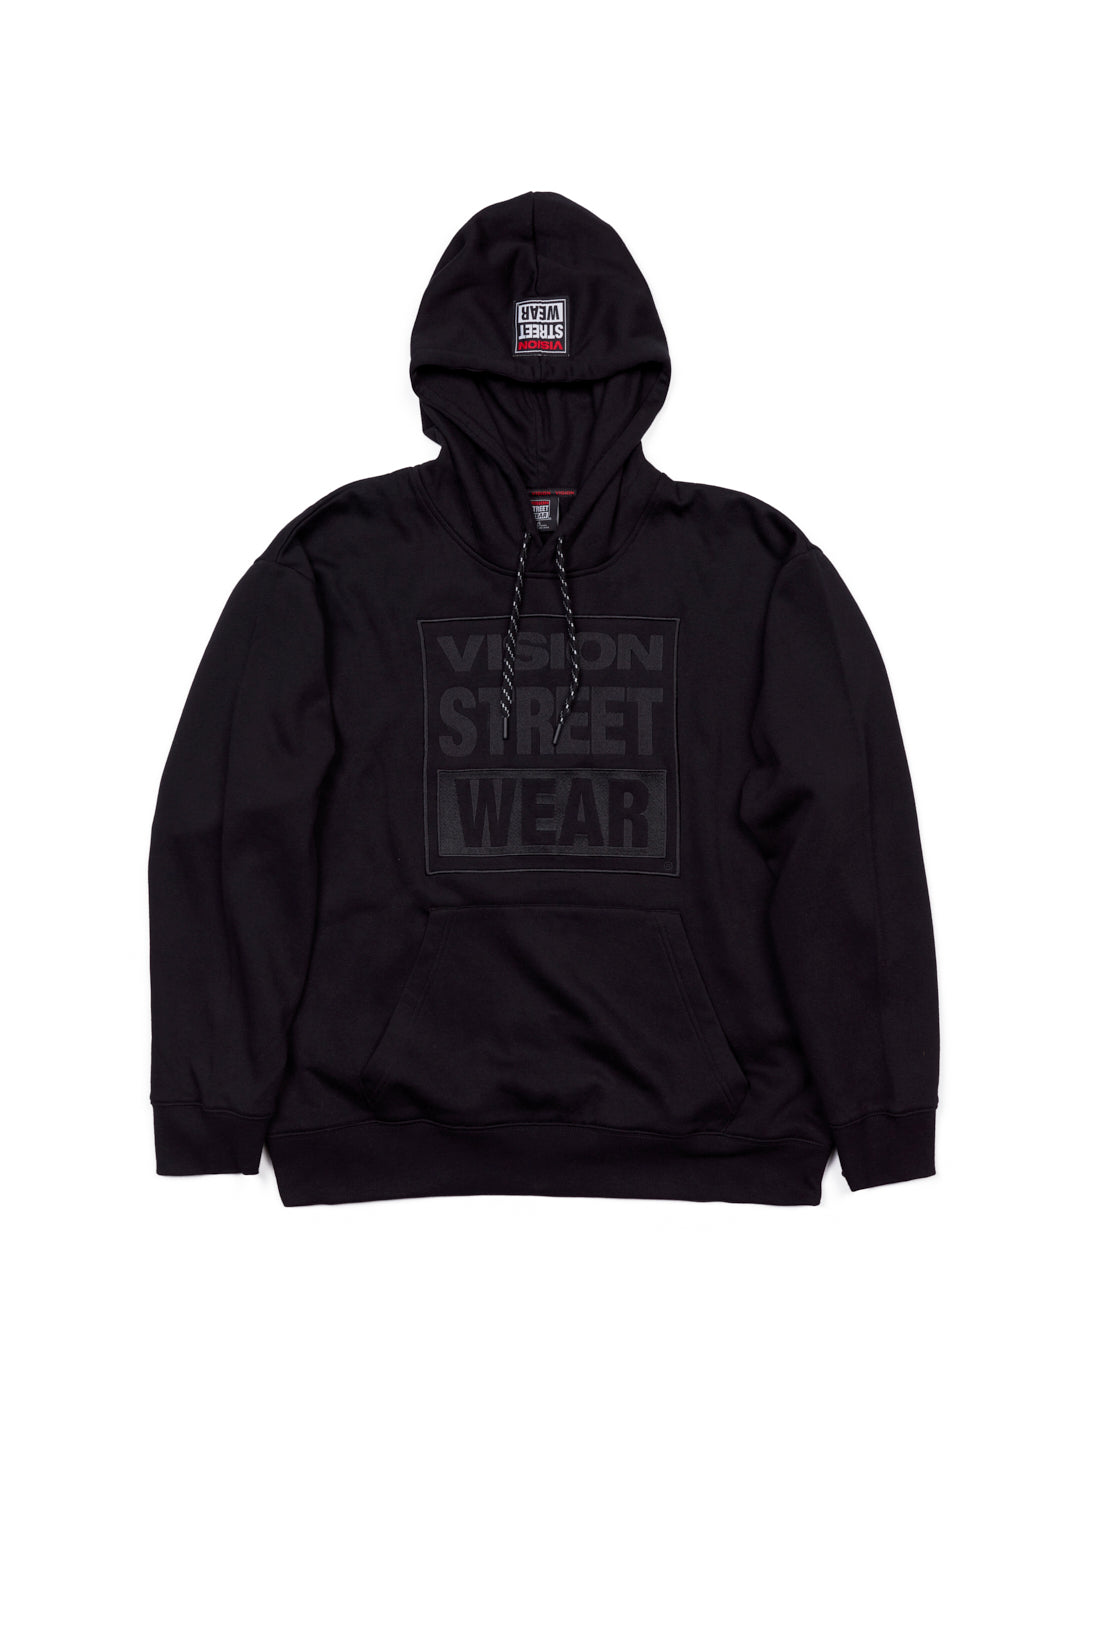 Vision Street Wear Front Embroided Logo Hoodie Black